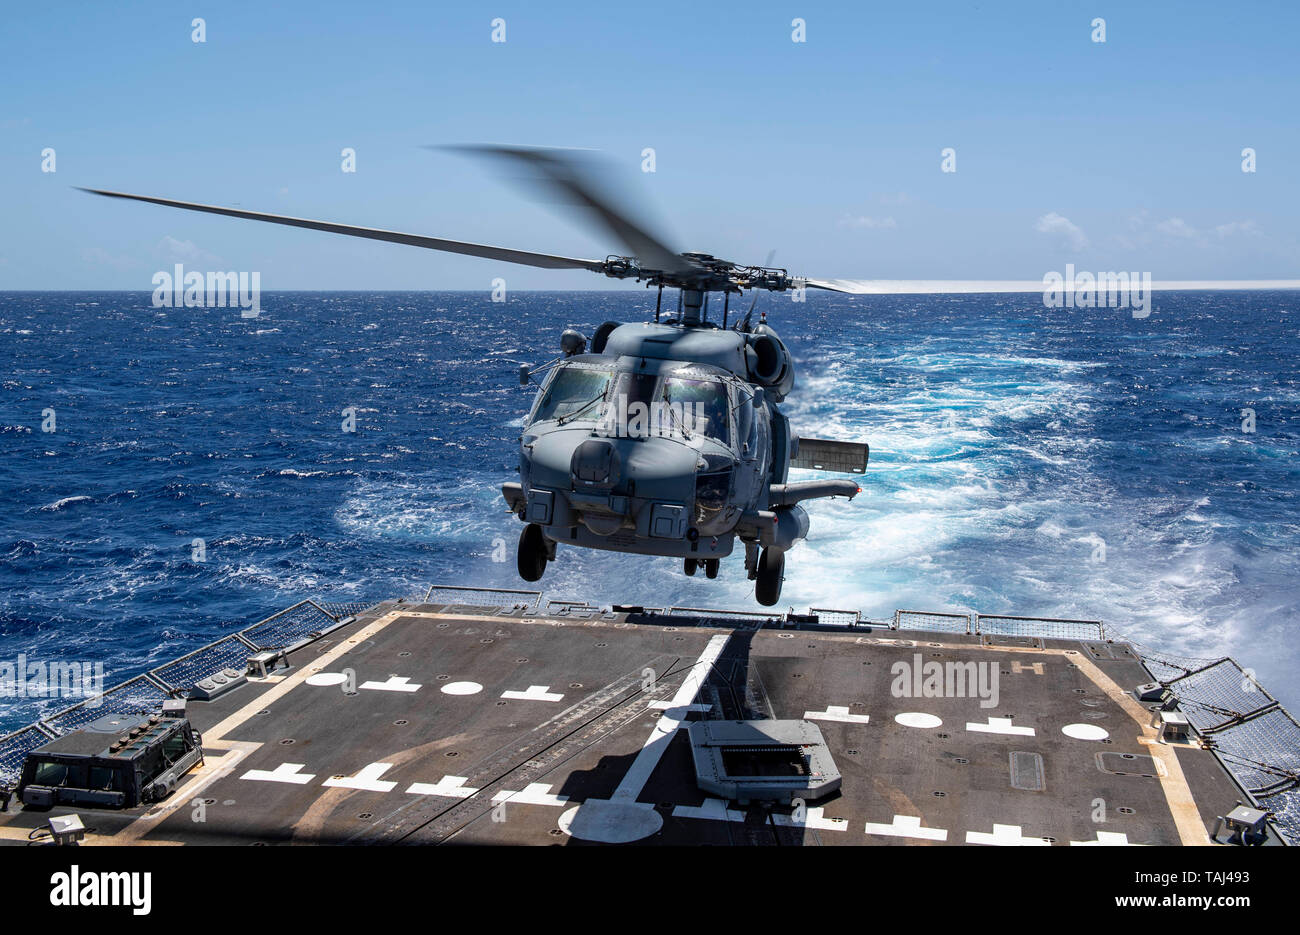 190523-N-NU281-1260 PACIFIC OCEAN (May 23, 2019) An MH-60R Sea Hawk, assigned to the 'Easyriders' of Helicopter Maritime Strike Squadron (HSM) 37, launches from the flight deck of the Arleigh Burke-class guided-missile destroyer USS Michael Murphy (DDG 112). Murphy is conducting routine operations in the eastern Pacific. (U.S. Navy photo by Mass Communication Specialist 2nd Class Justin R. Pacheco) Stock Photo